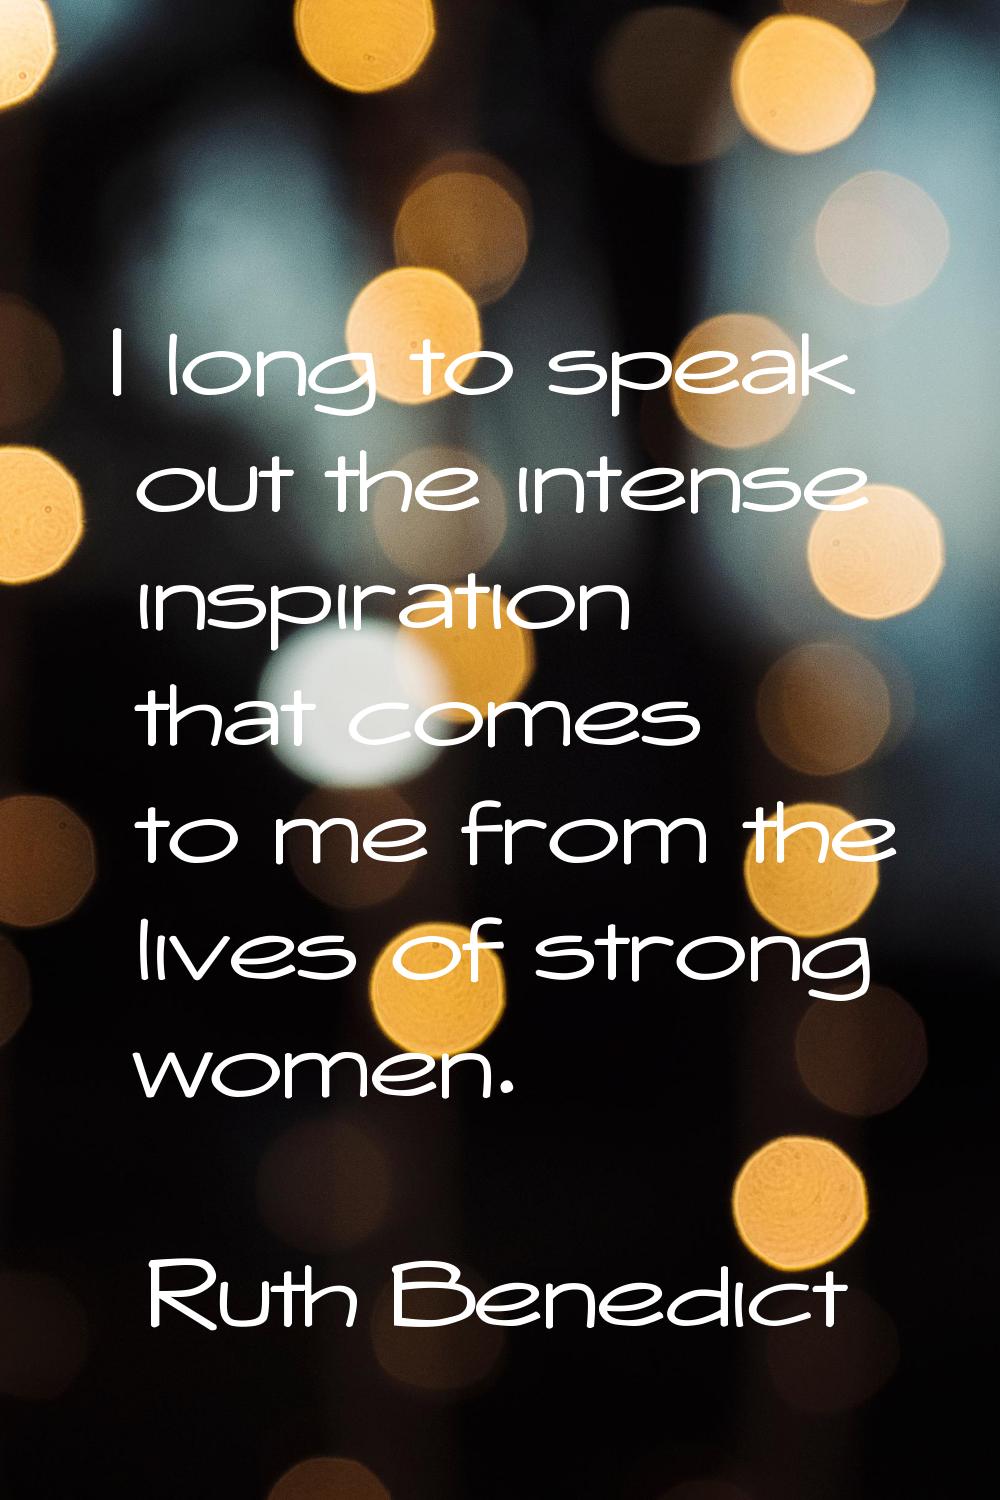 I long to speak out the intense inspiration that comes to me from the lives of strong women.